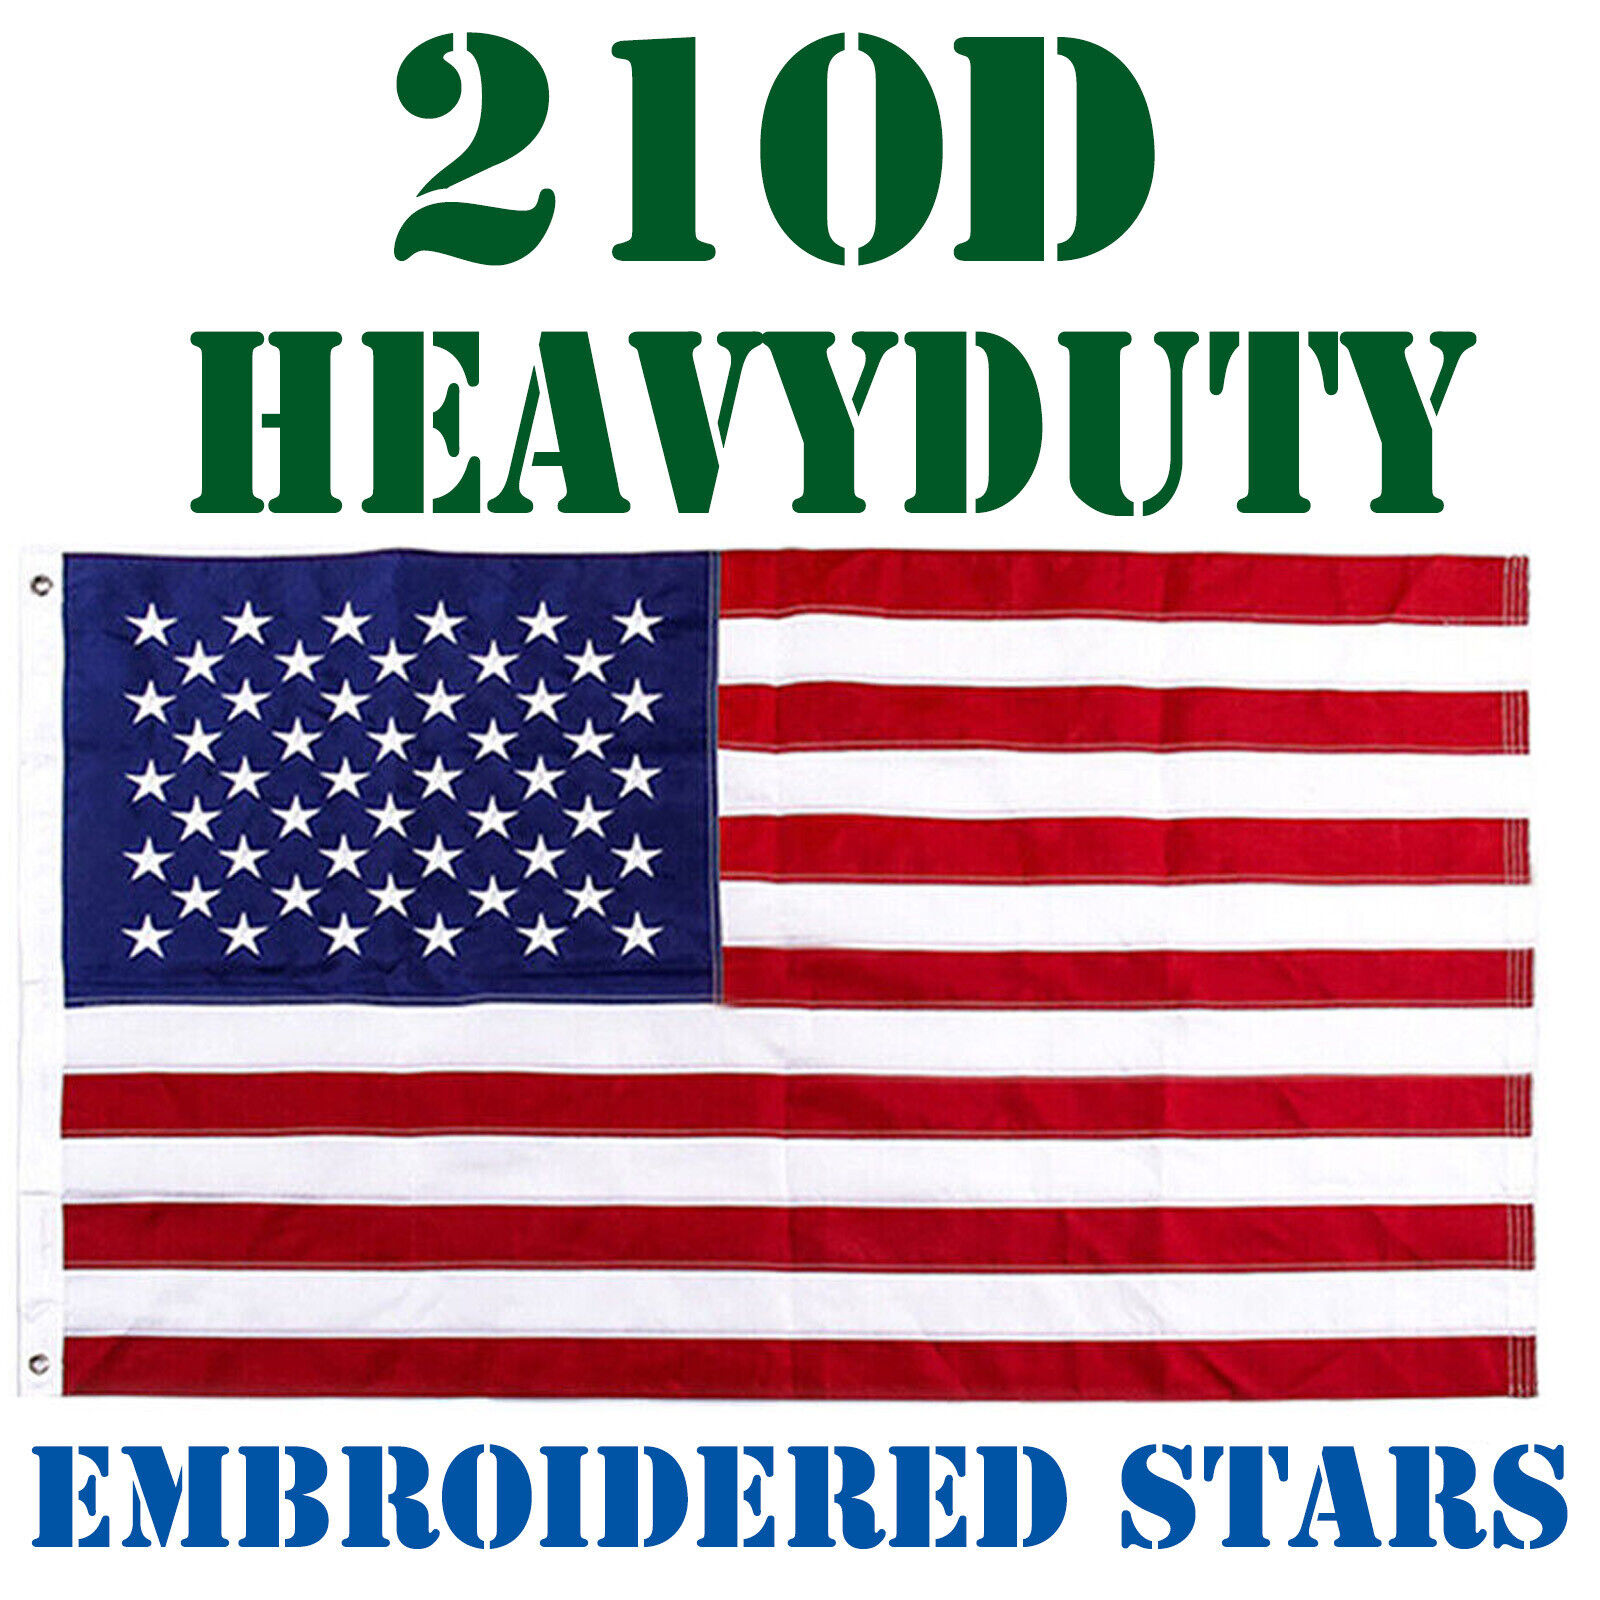 5'x8' US American Flag Heavy Duty Embroidered Stars Sewn Stripes Grommets Oxford